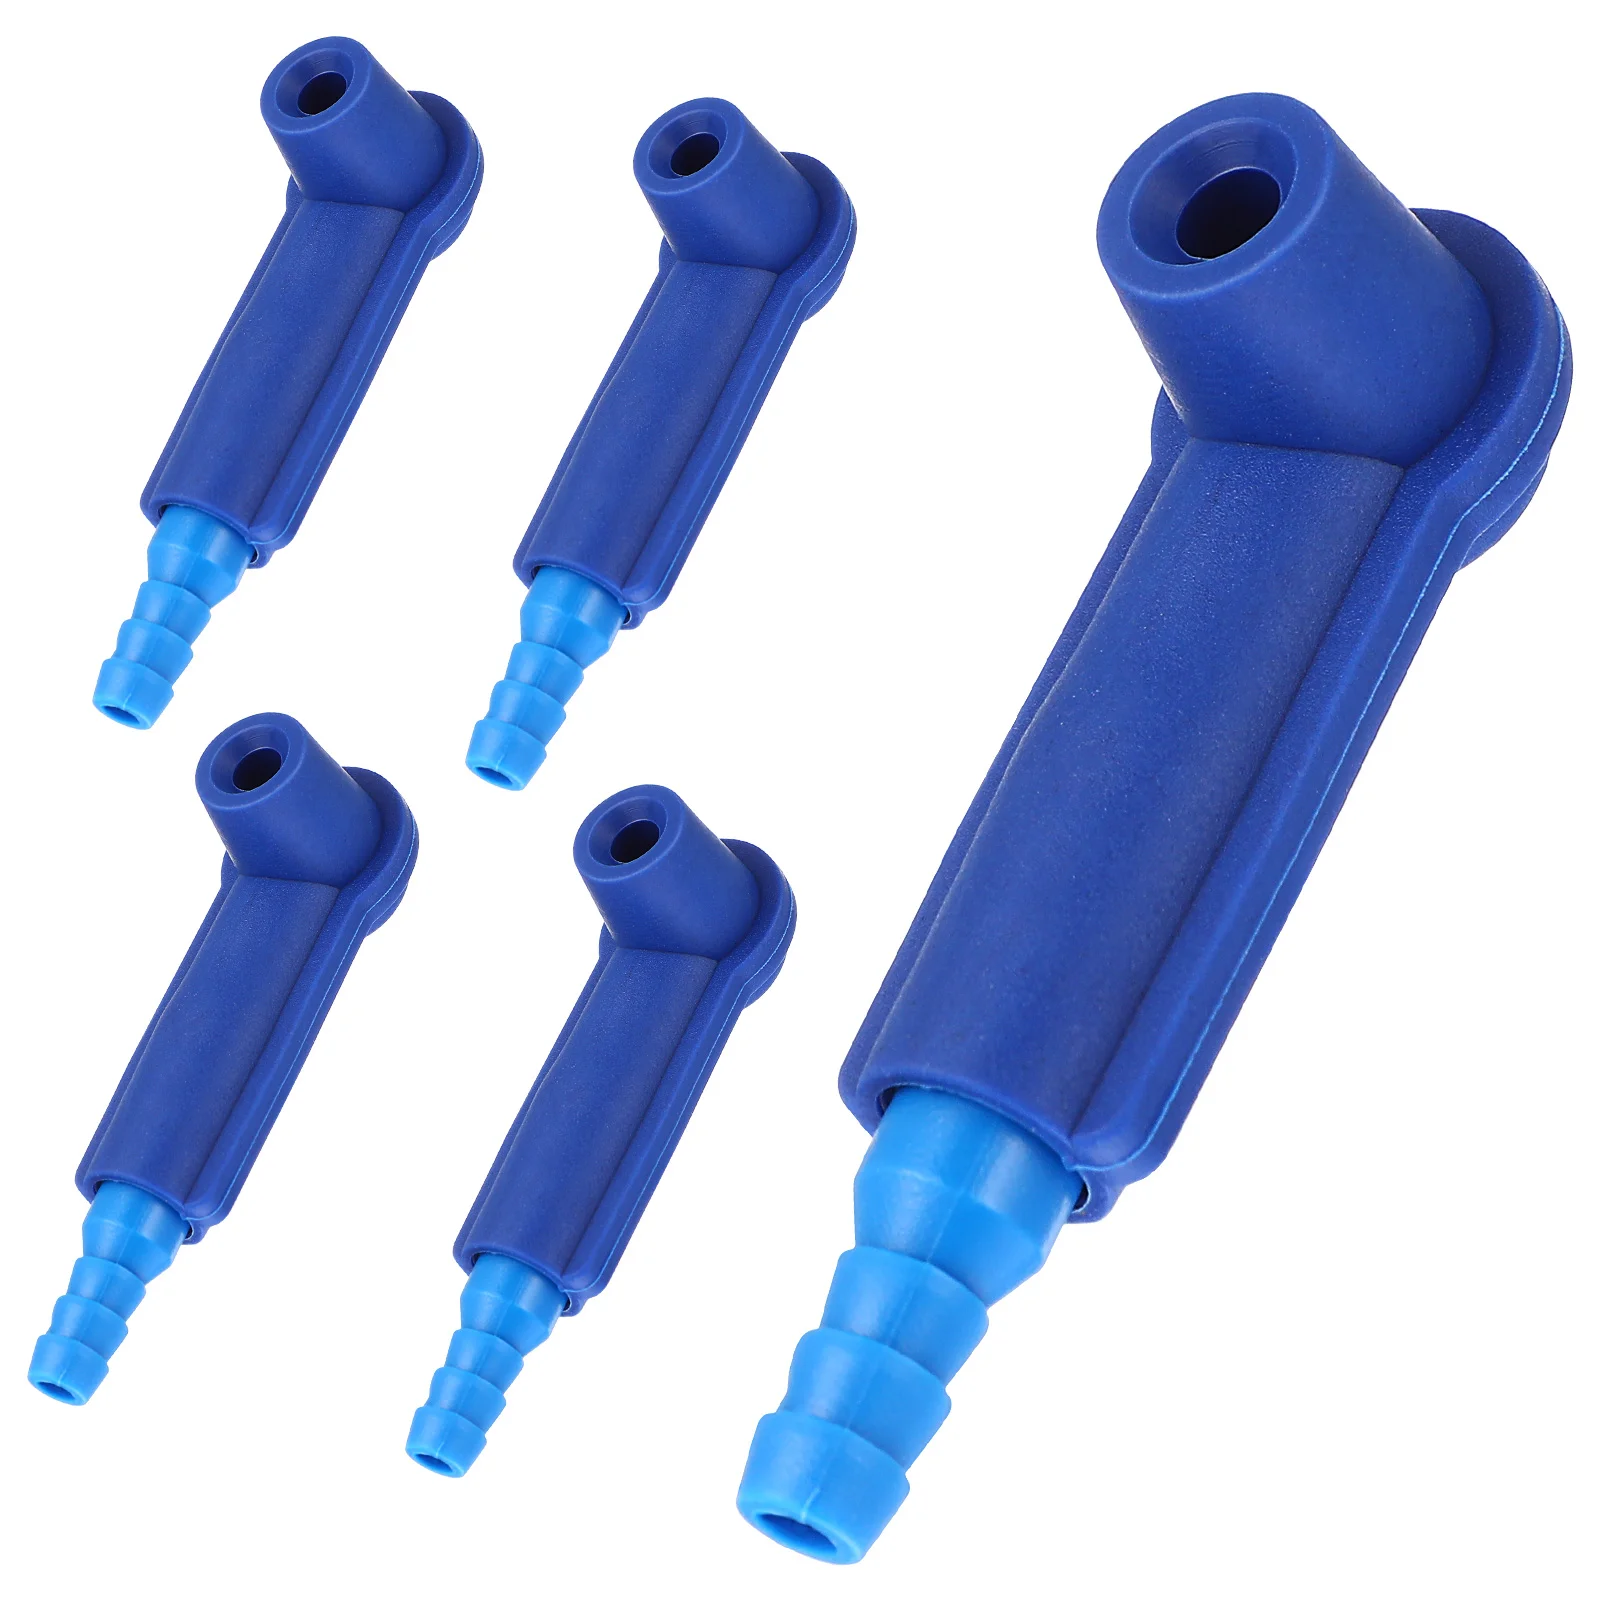 

5 Pcs Suction Pipe Joint Brake Fluid Changer Connector Exchange Adapters Oil Bleeder Air Fittings Accessories Car Deflation